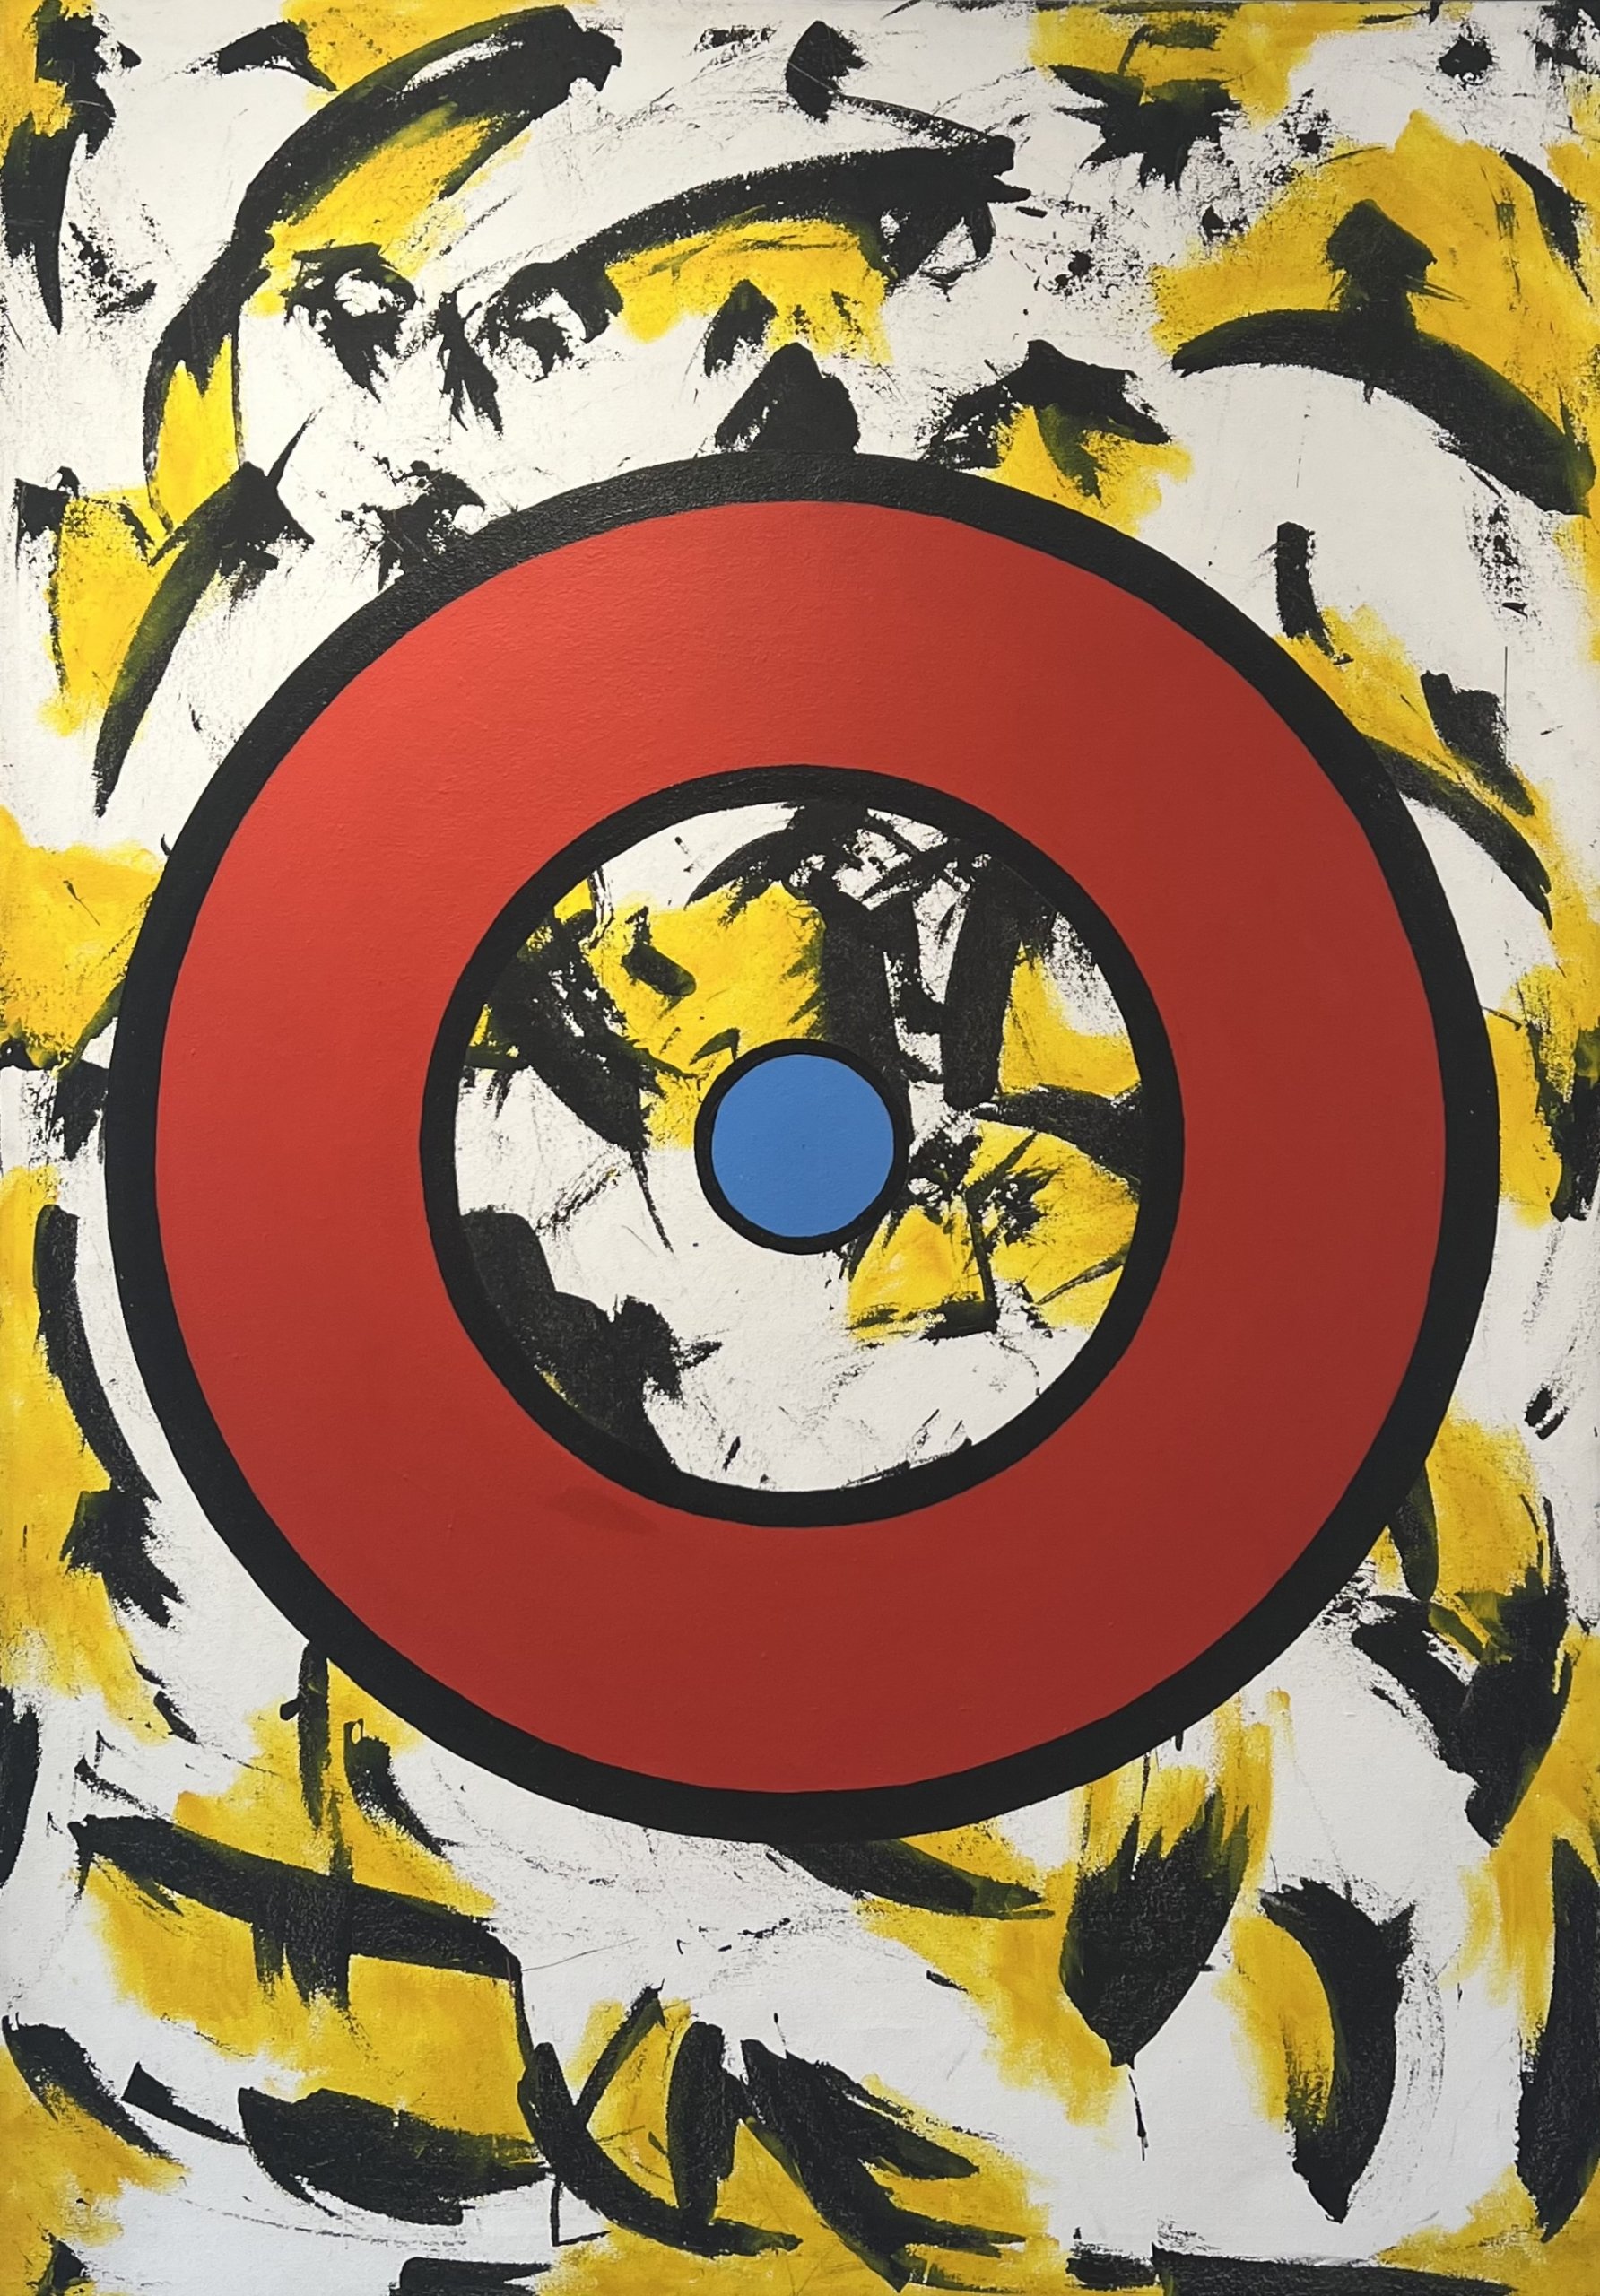 Stephen Loschen's "Red Circle" at Lucore Art